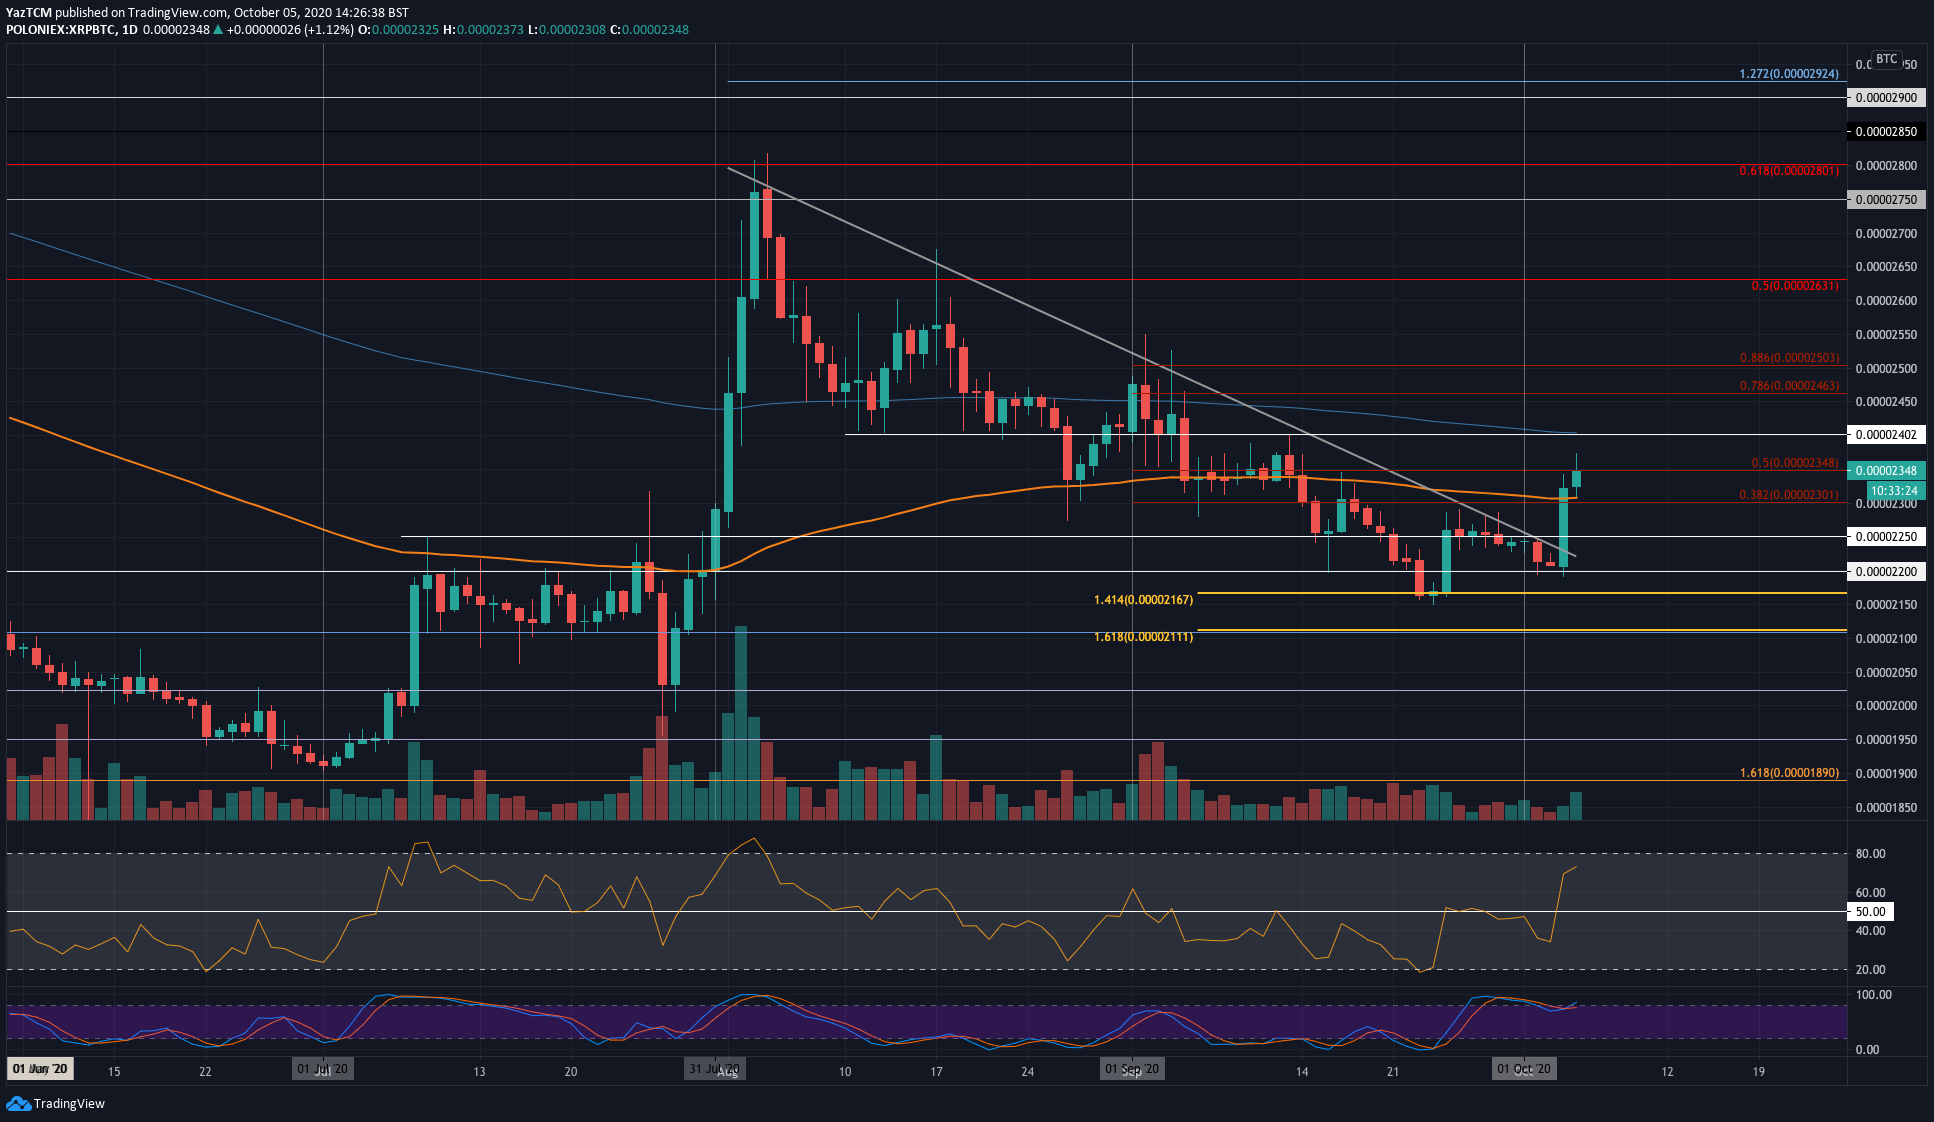 XRP Price Analysis: Ripple Soars 8% On The Daily, Is $0.30 Next?